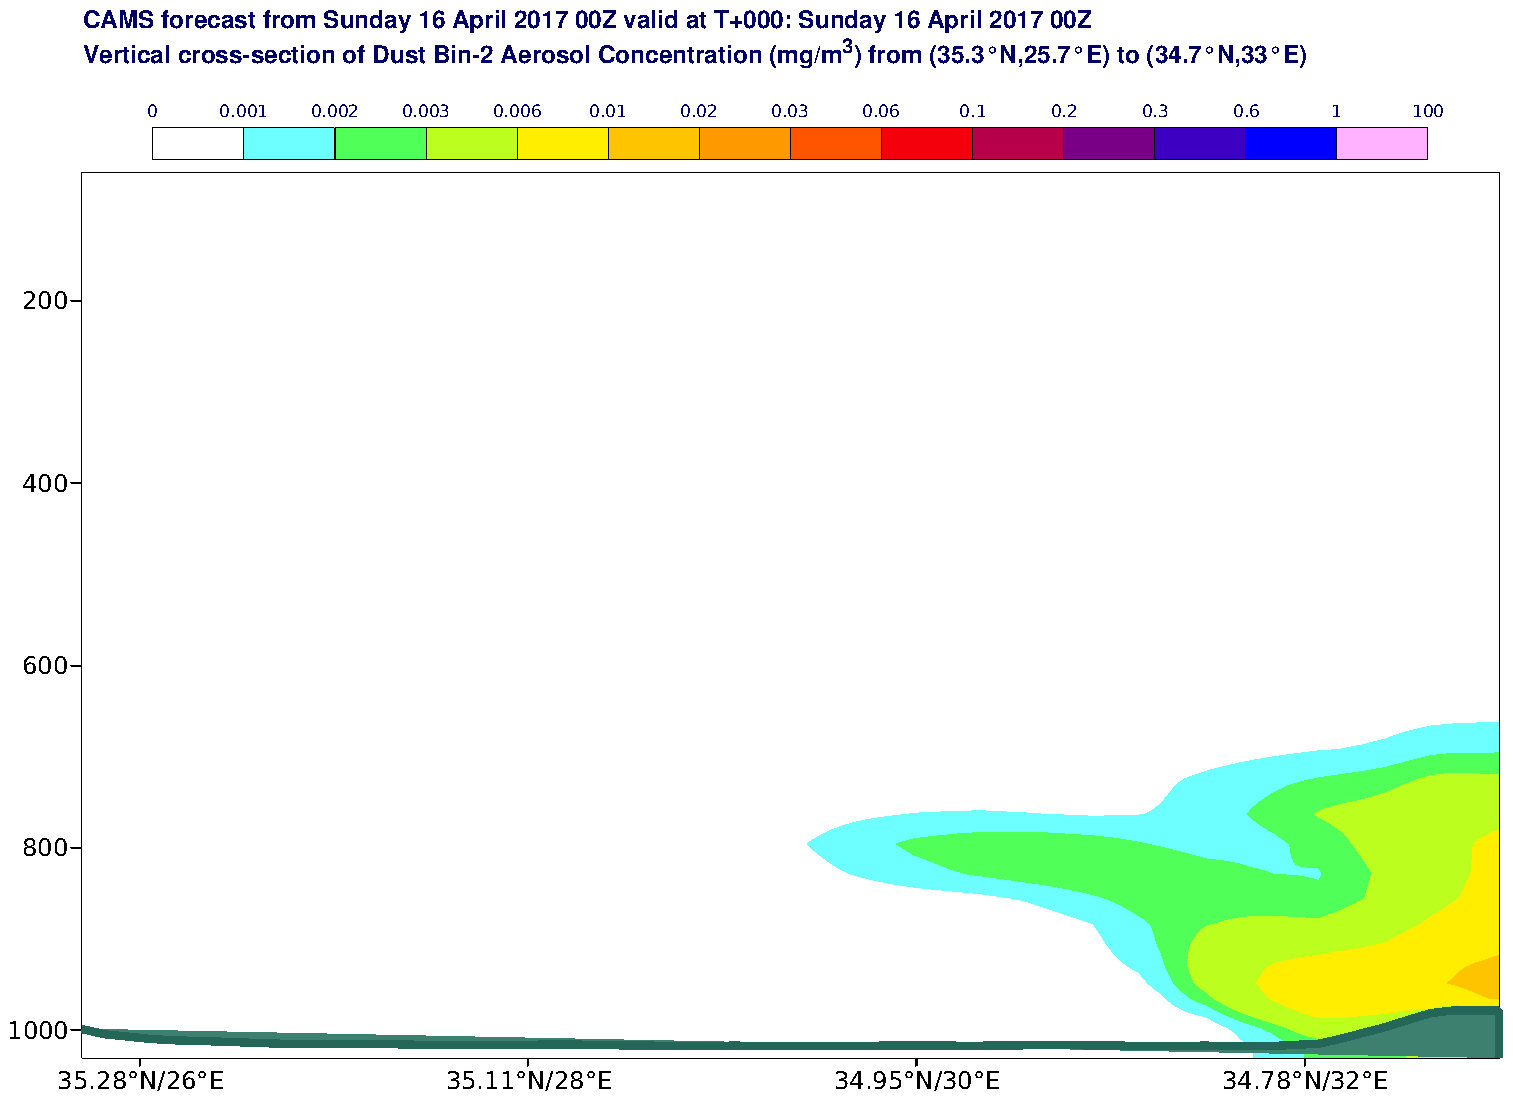 Vertical cross-section of Dust Bin-2 Aerosol Concentration (mg/m3) valid at T0 - 2017-04-16 00:00